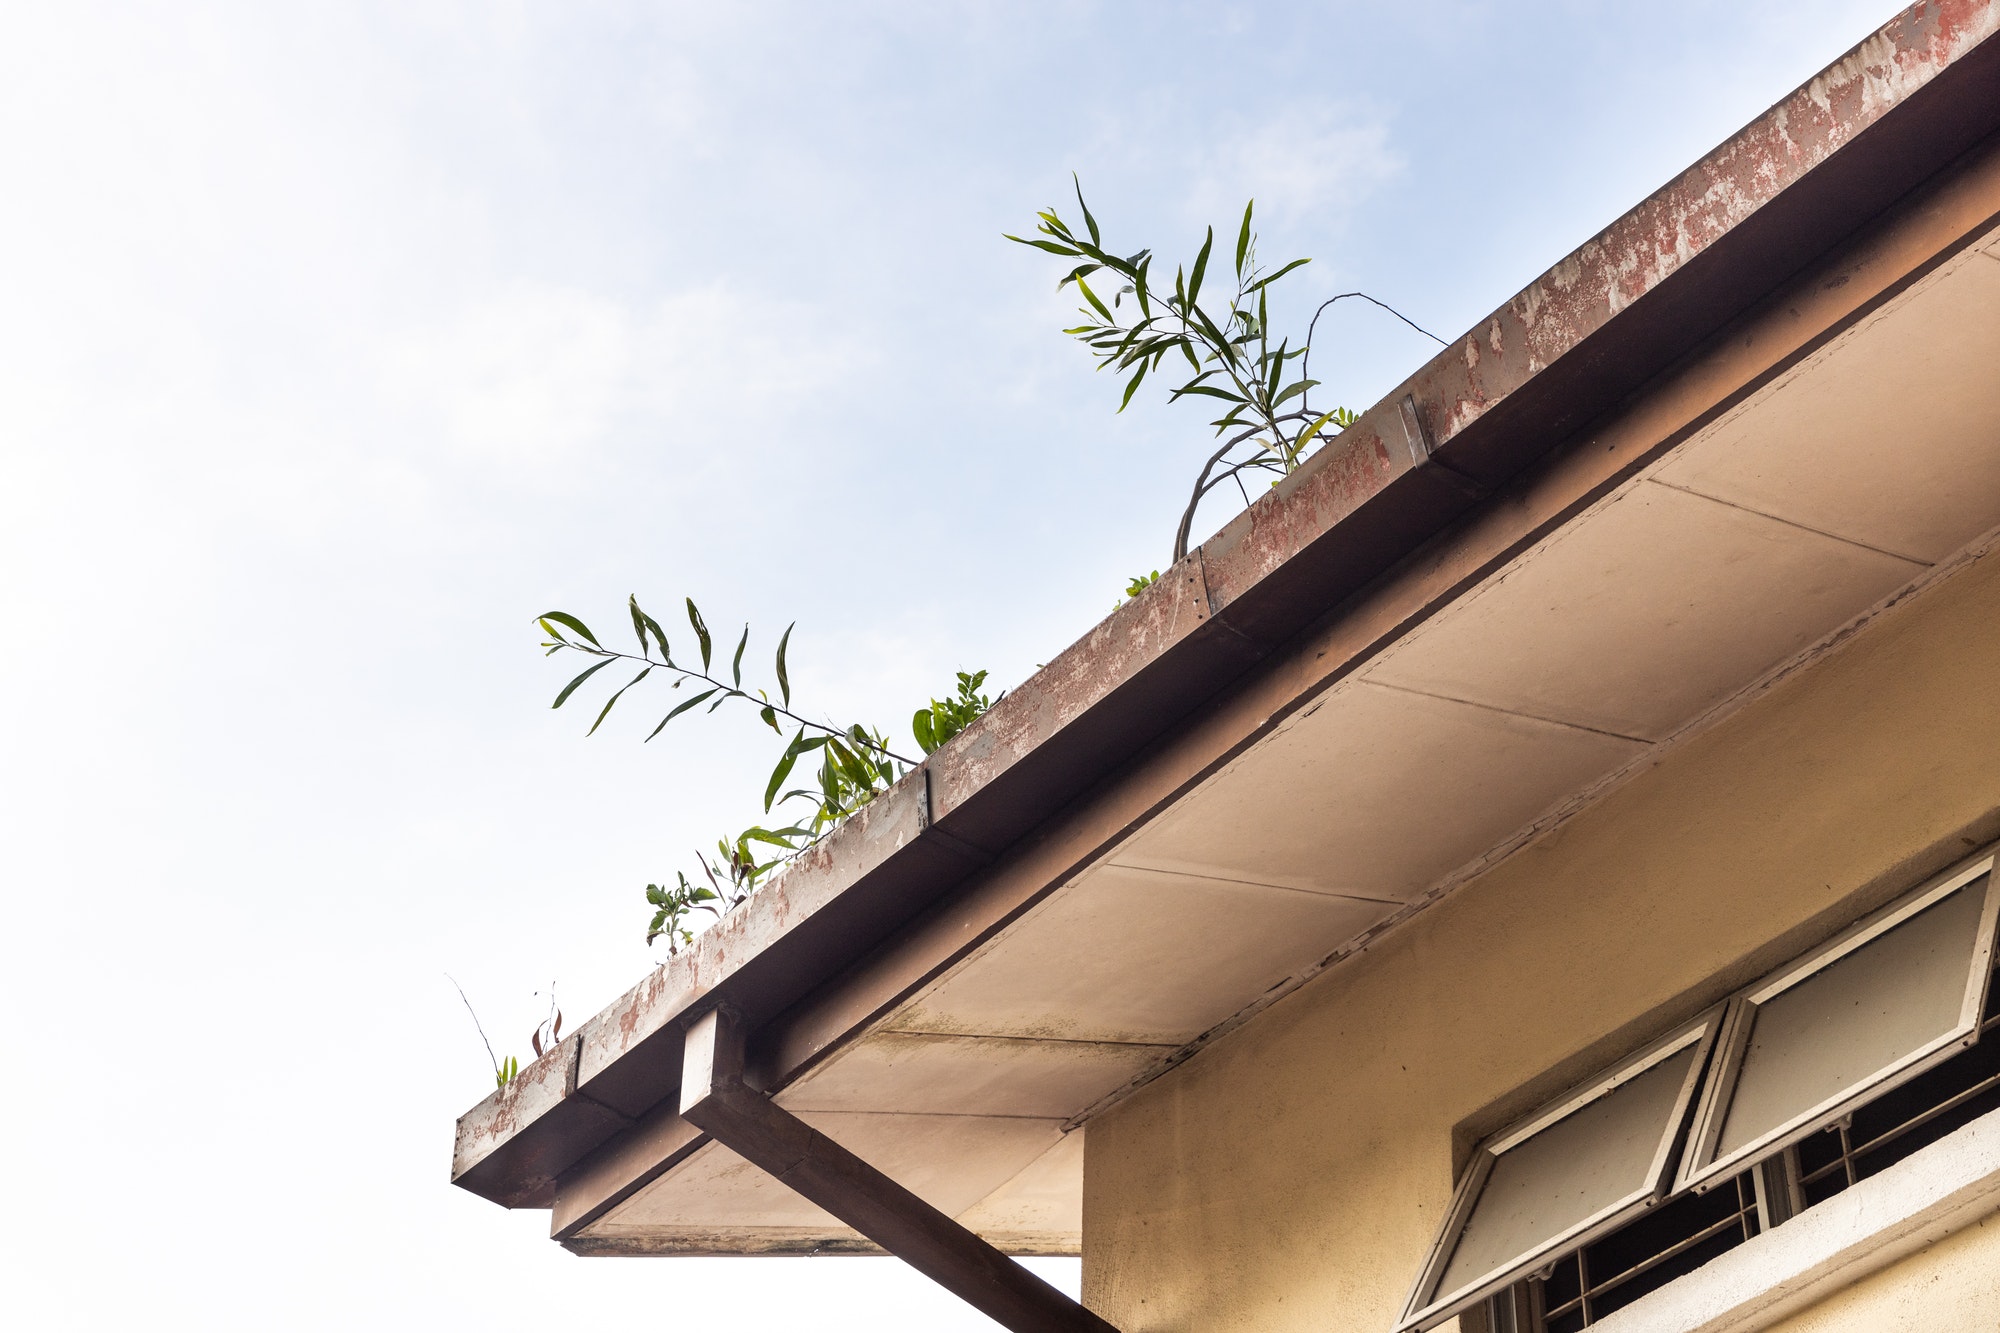 Clogged roof rain gutter full of dry leaf and plant growing in it with blue sky